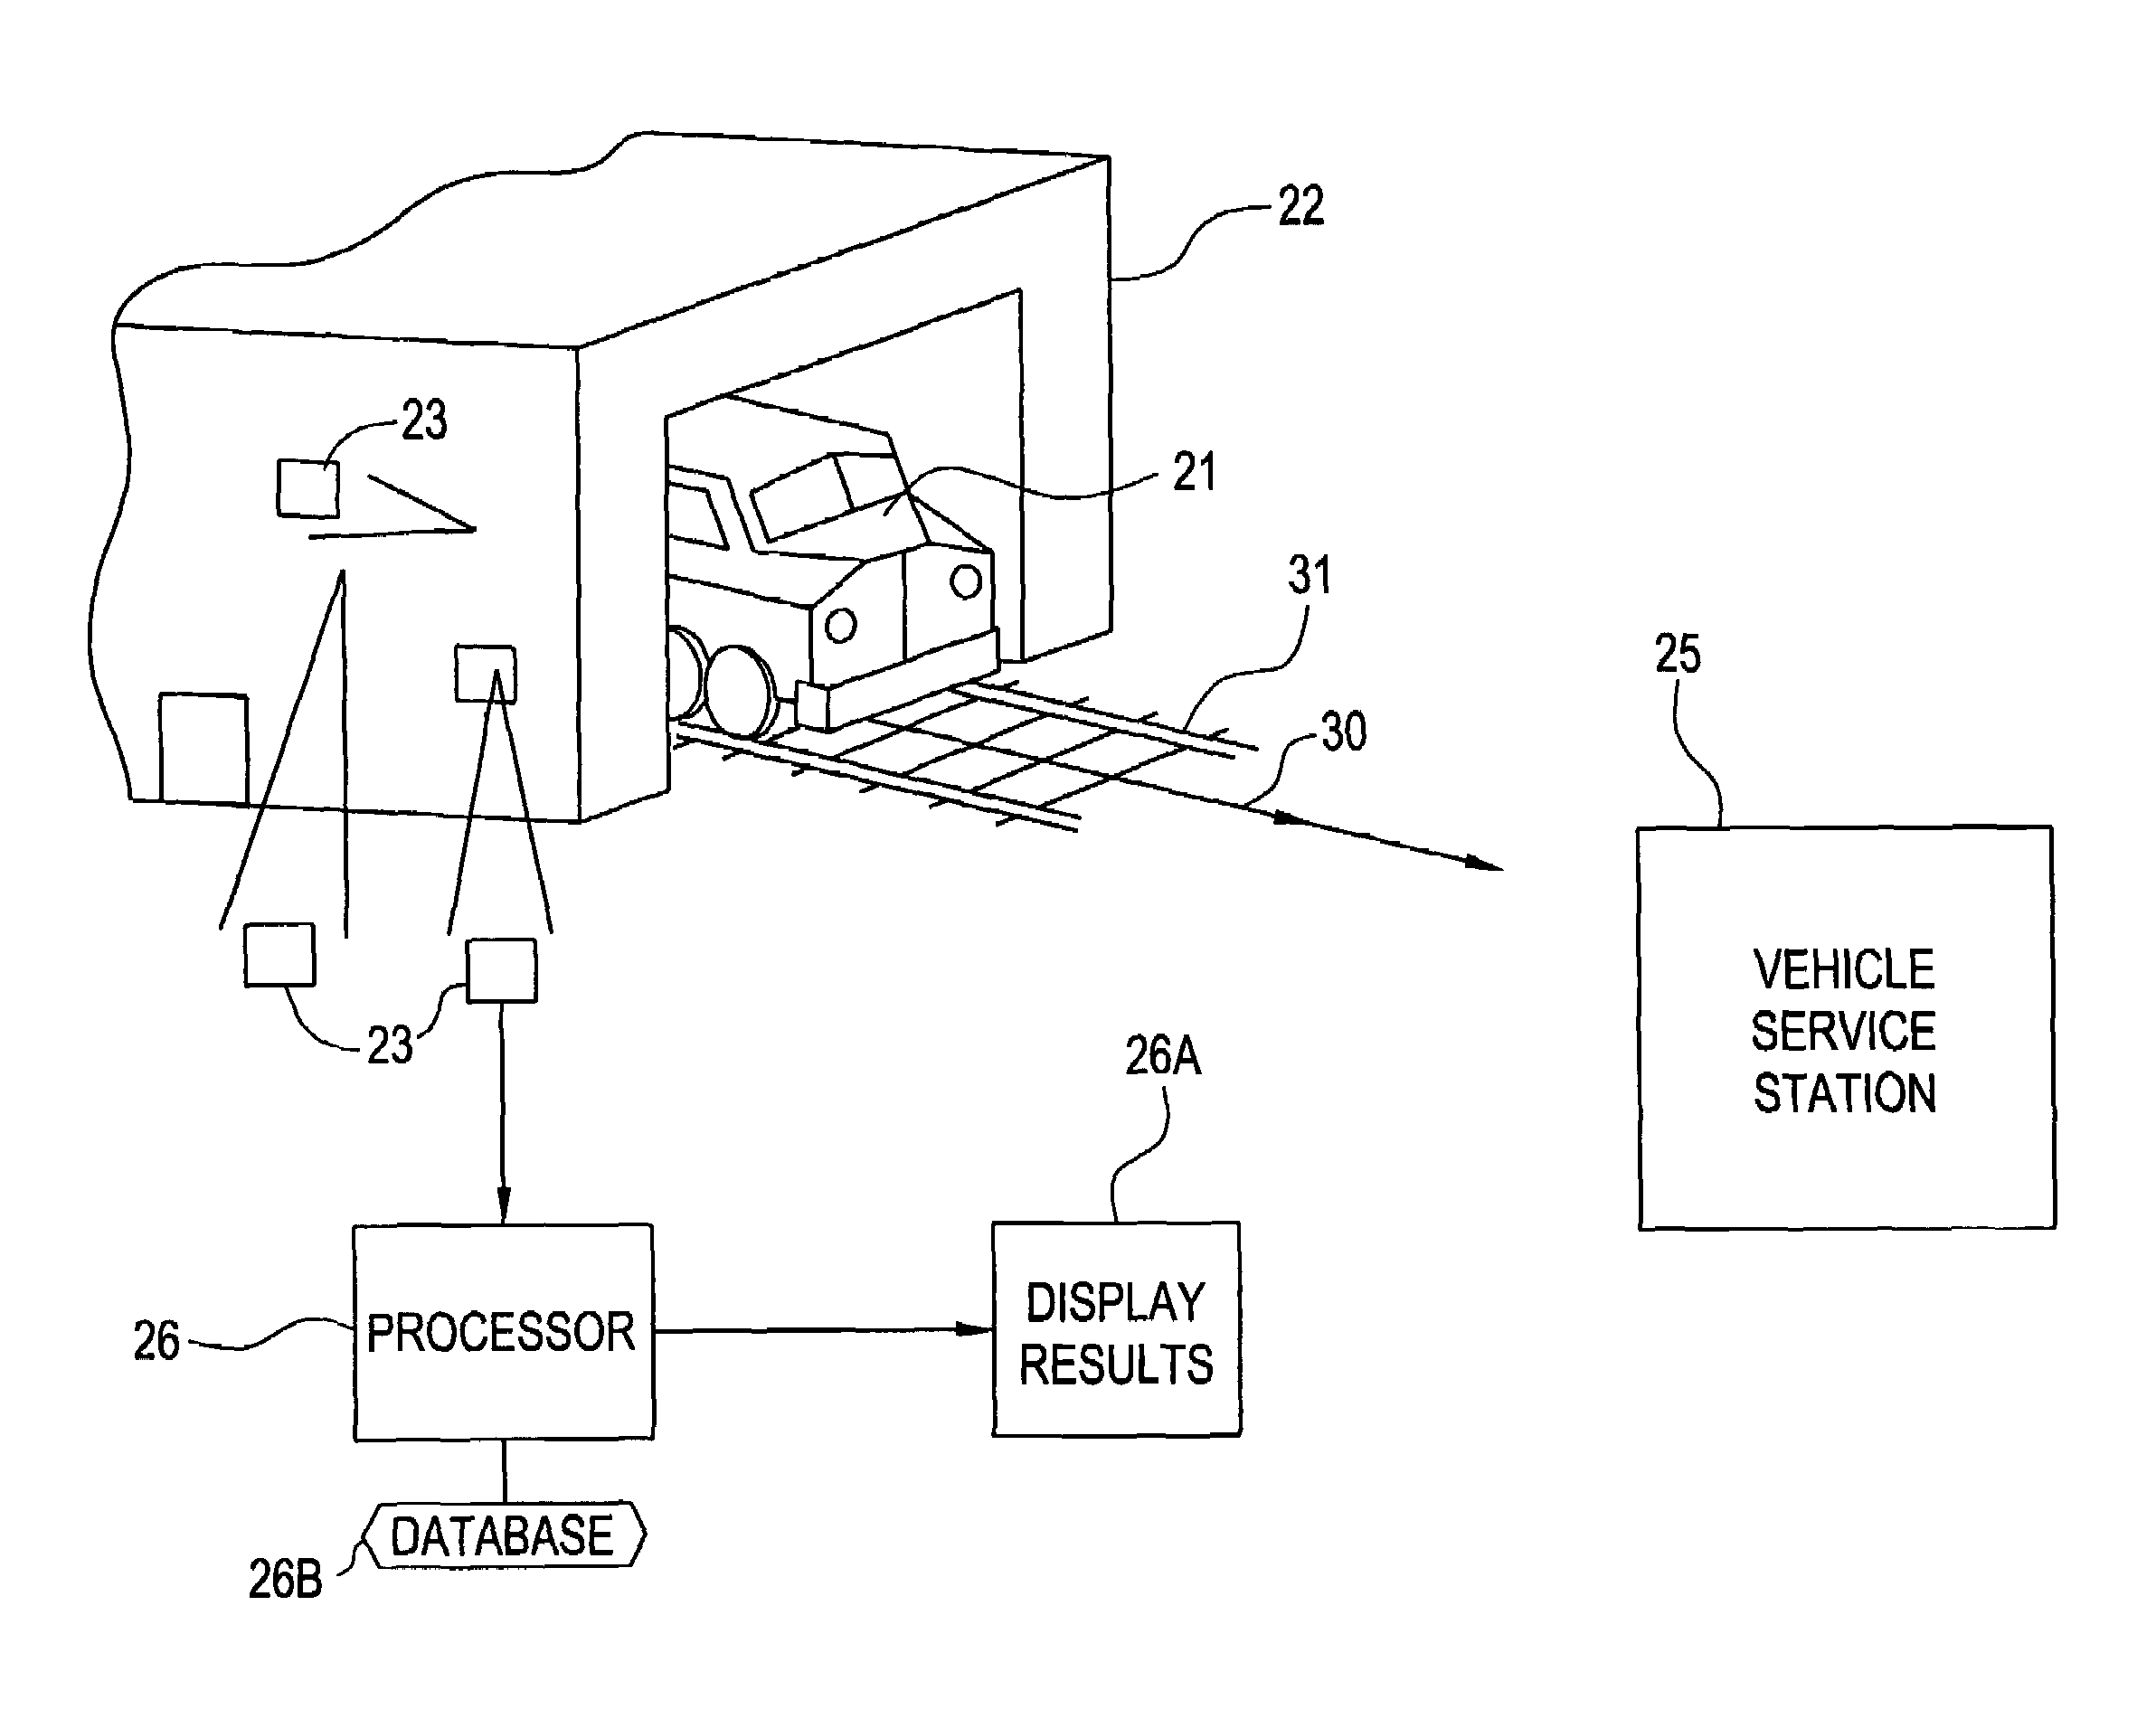 System and method for monitoring the condition of a vehicle